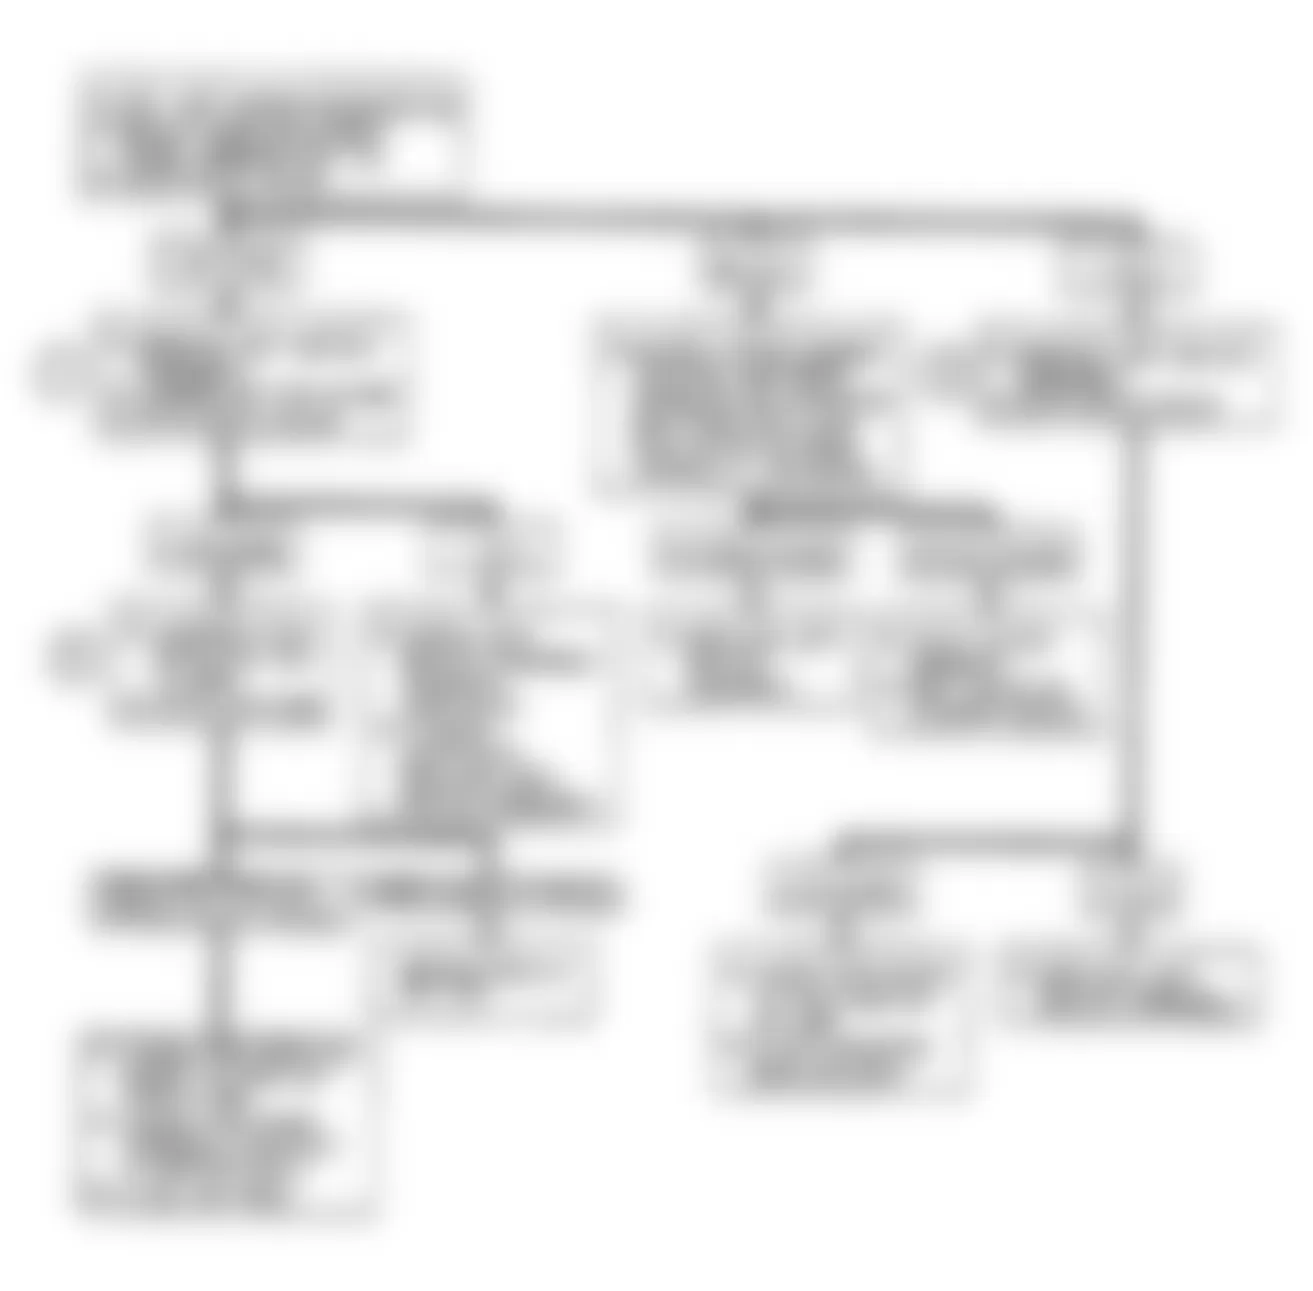 Buick Reatta 1990 - Component Locations -  Code B122: Flow Chart Panel Dimming Potentiometer Circuit